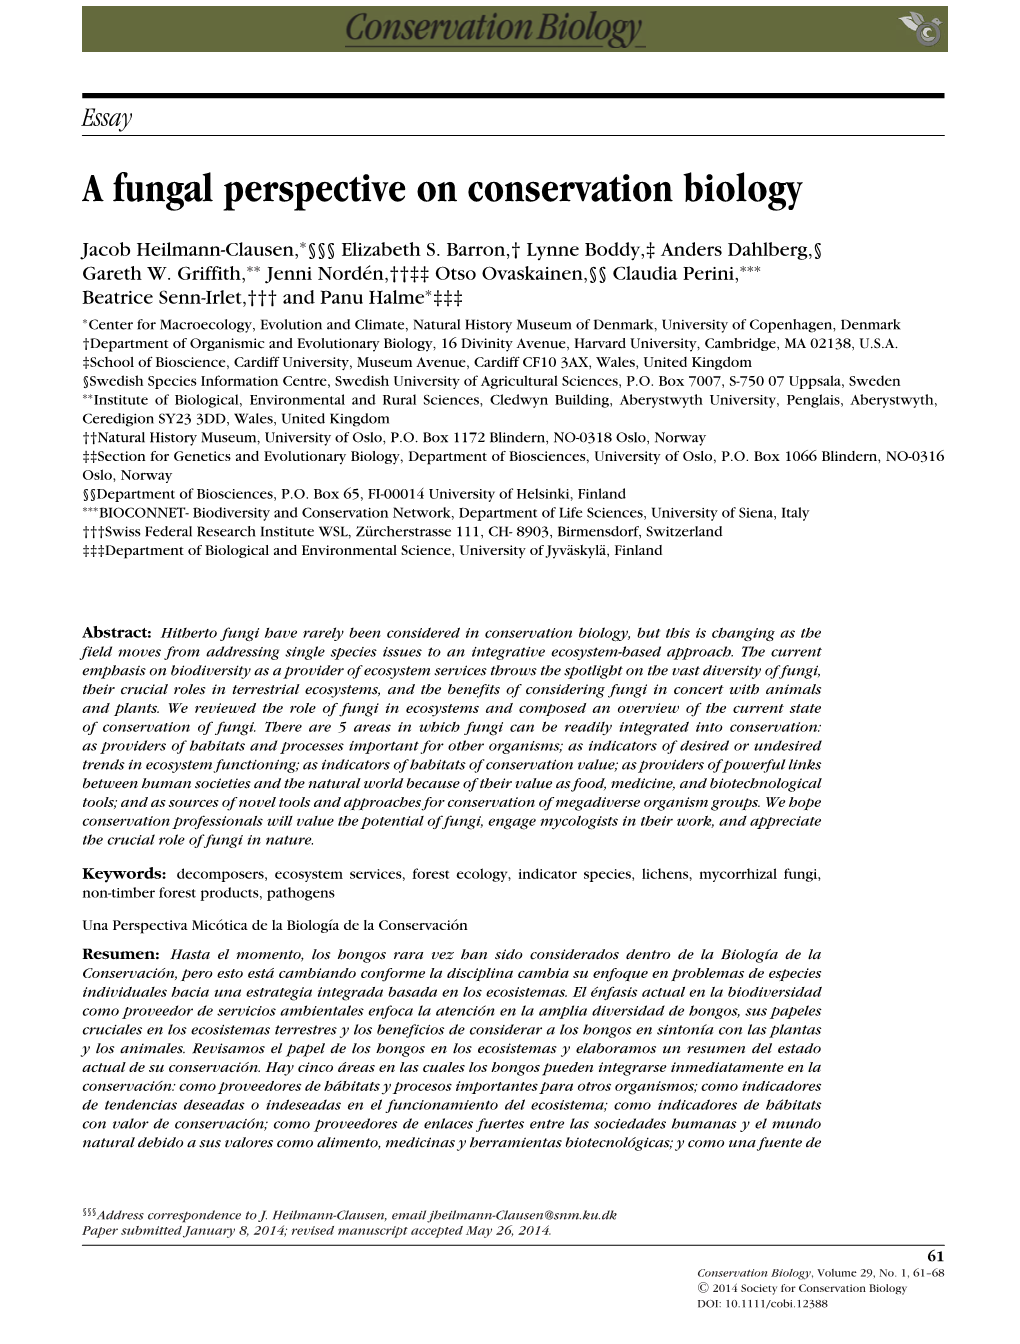 A Fungal Perspective on Conservation Biology